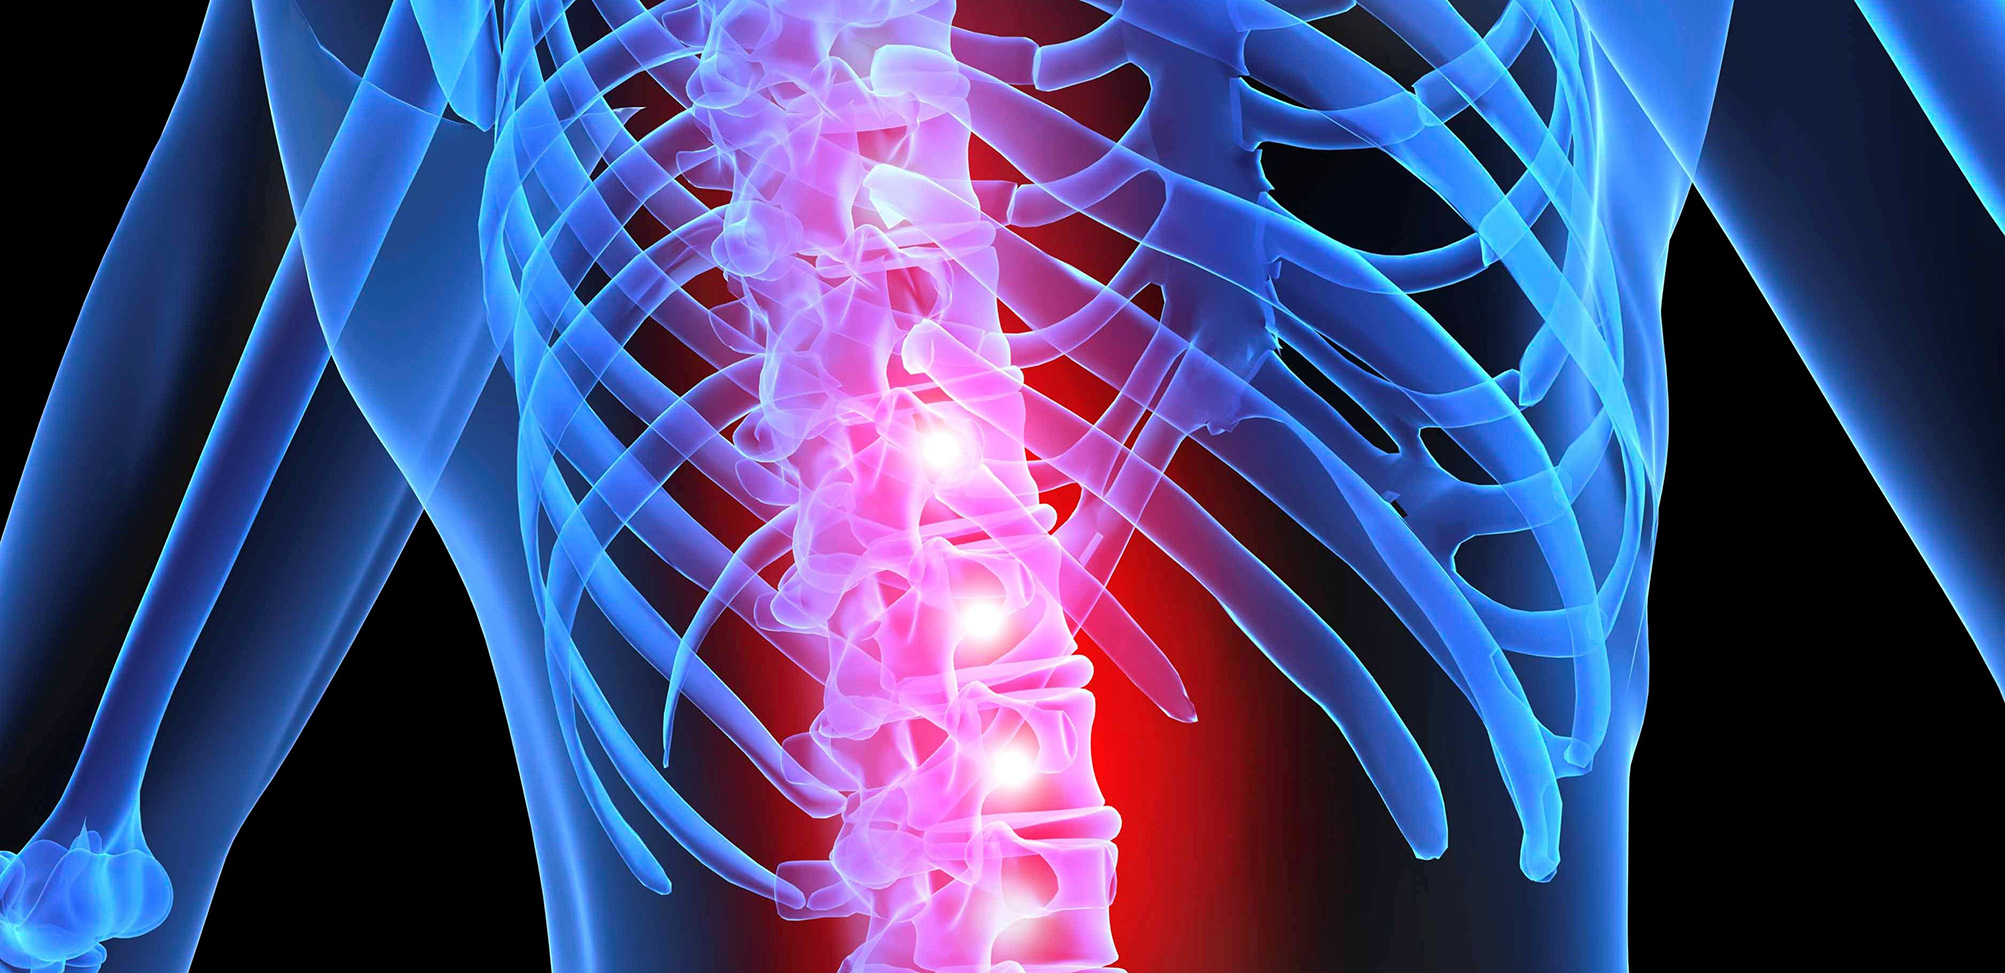 Graphic of skeleton and representation of Spine pain